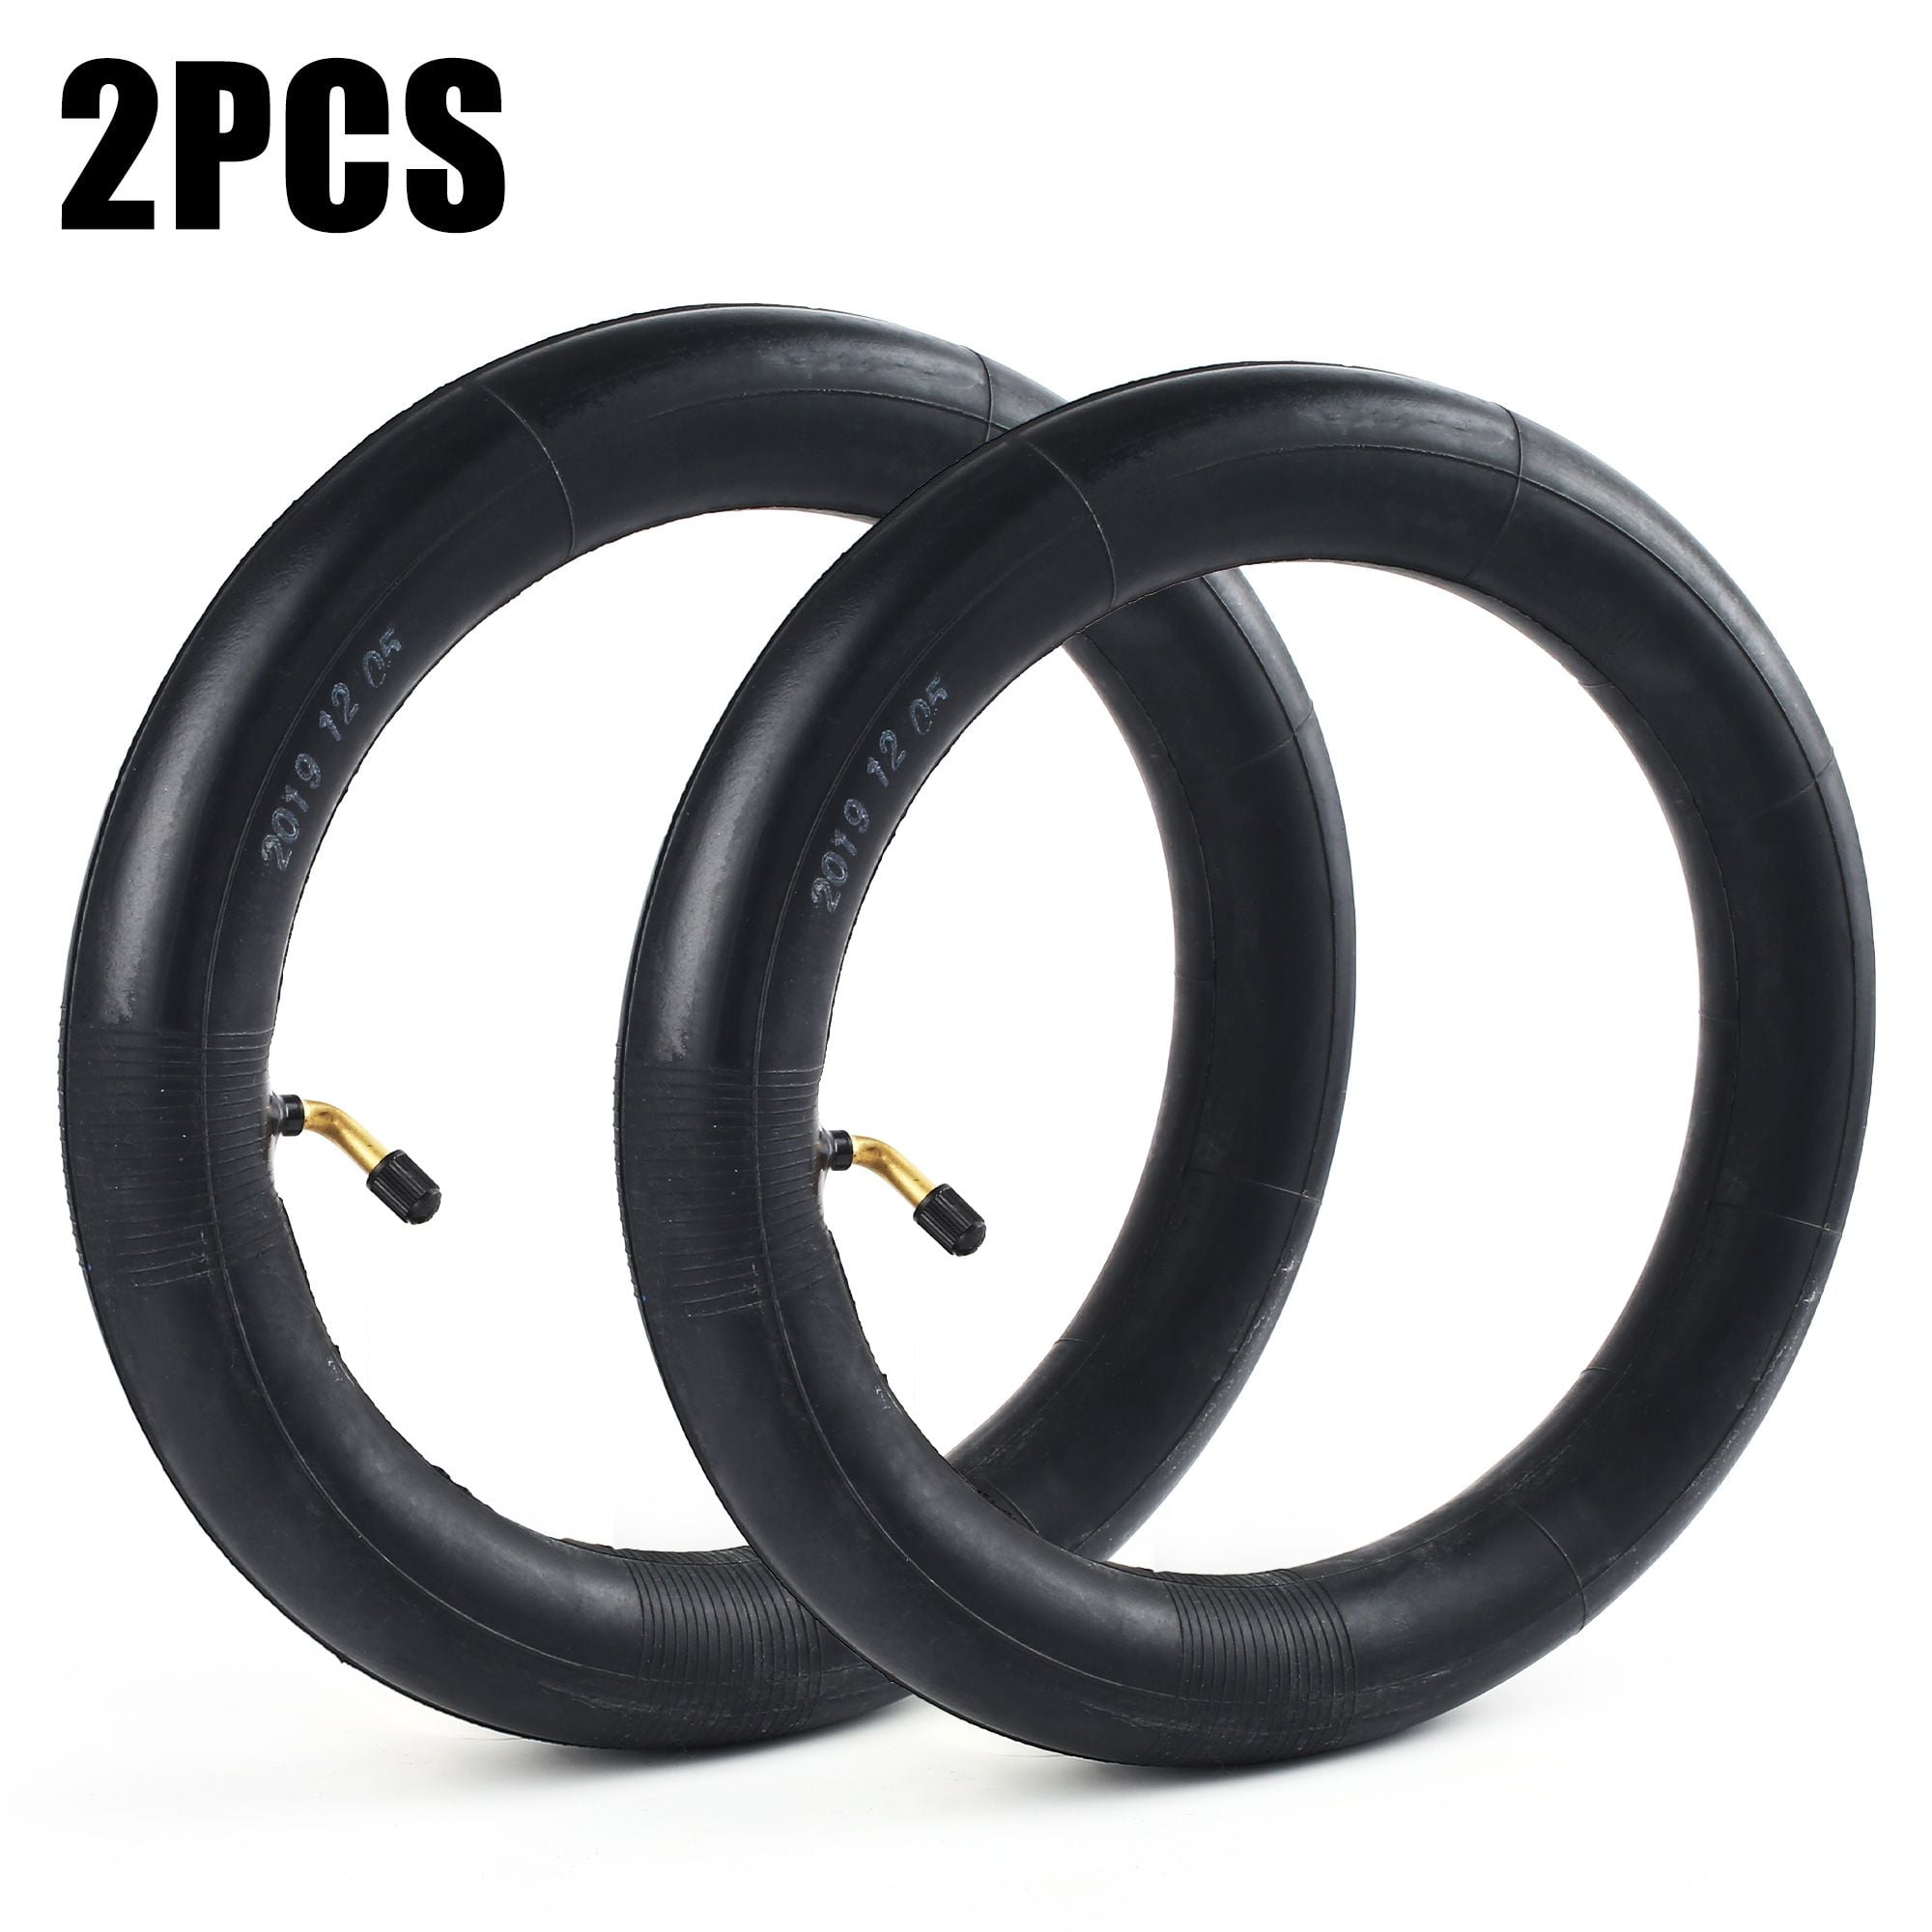 N/A High-performance Rubber 2.25/2.50 17 Inner Tube with Metal Valve Stem for Suzuki 